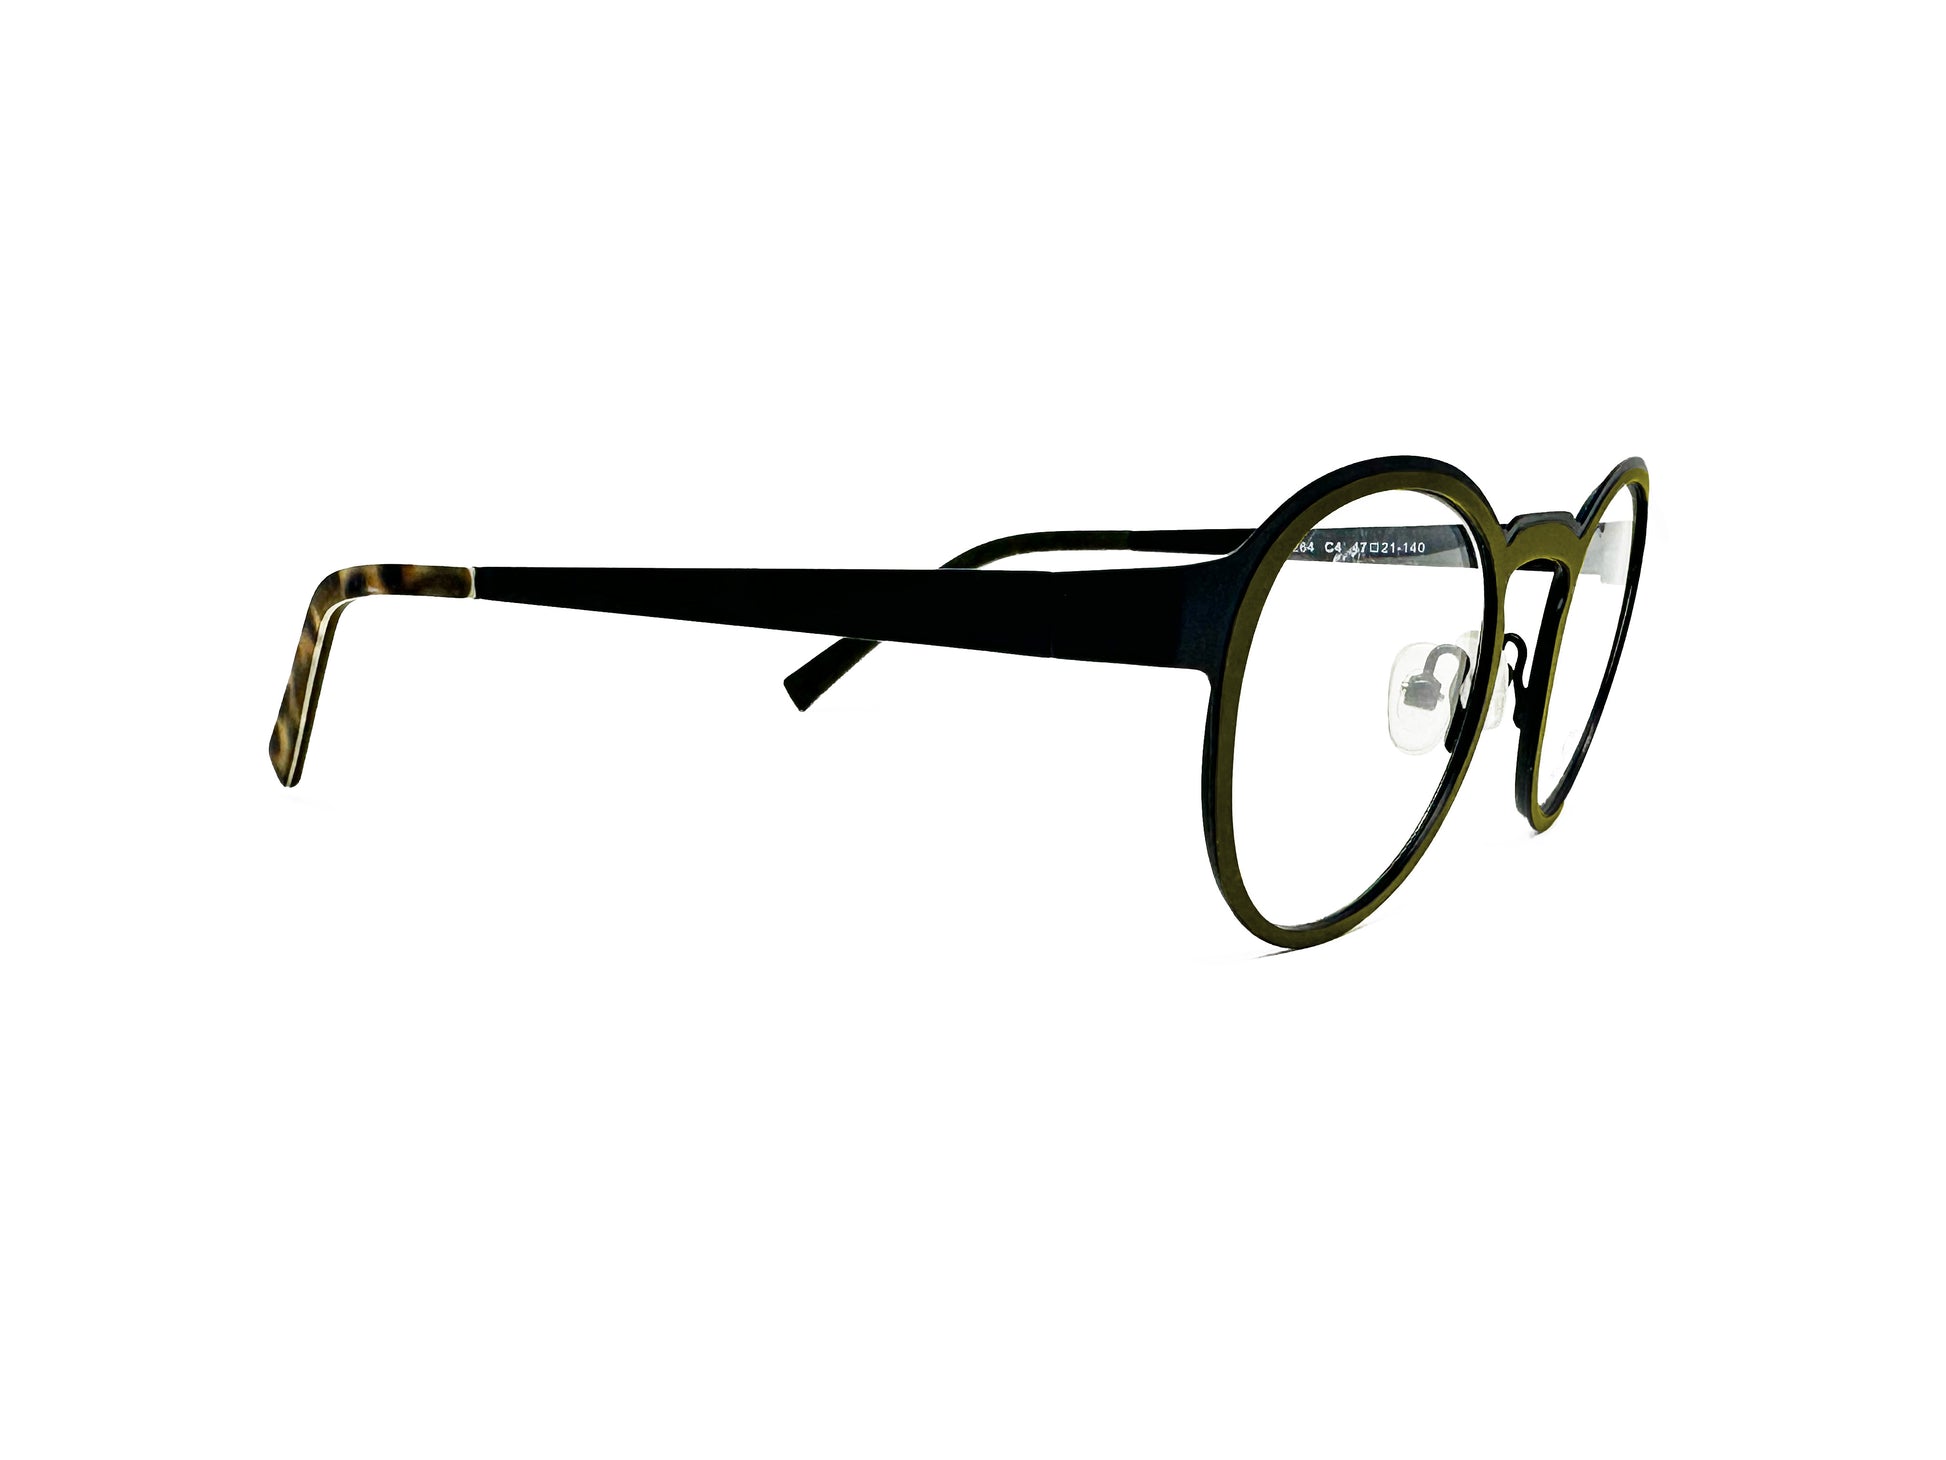 Social Eyes rouned, metal optical frame with keyhole bridge. Model: 1264. Color: C4 - Dark Olive with Black and tortoise temple tips. Sideview.